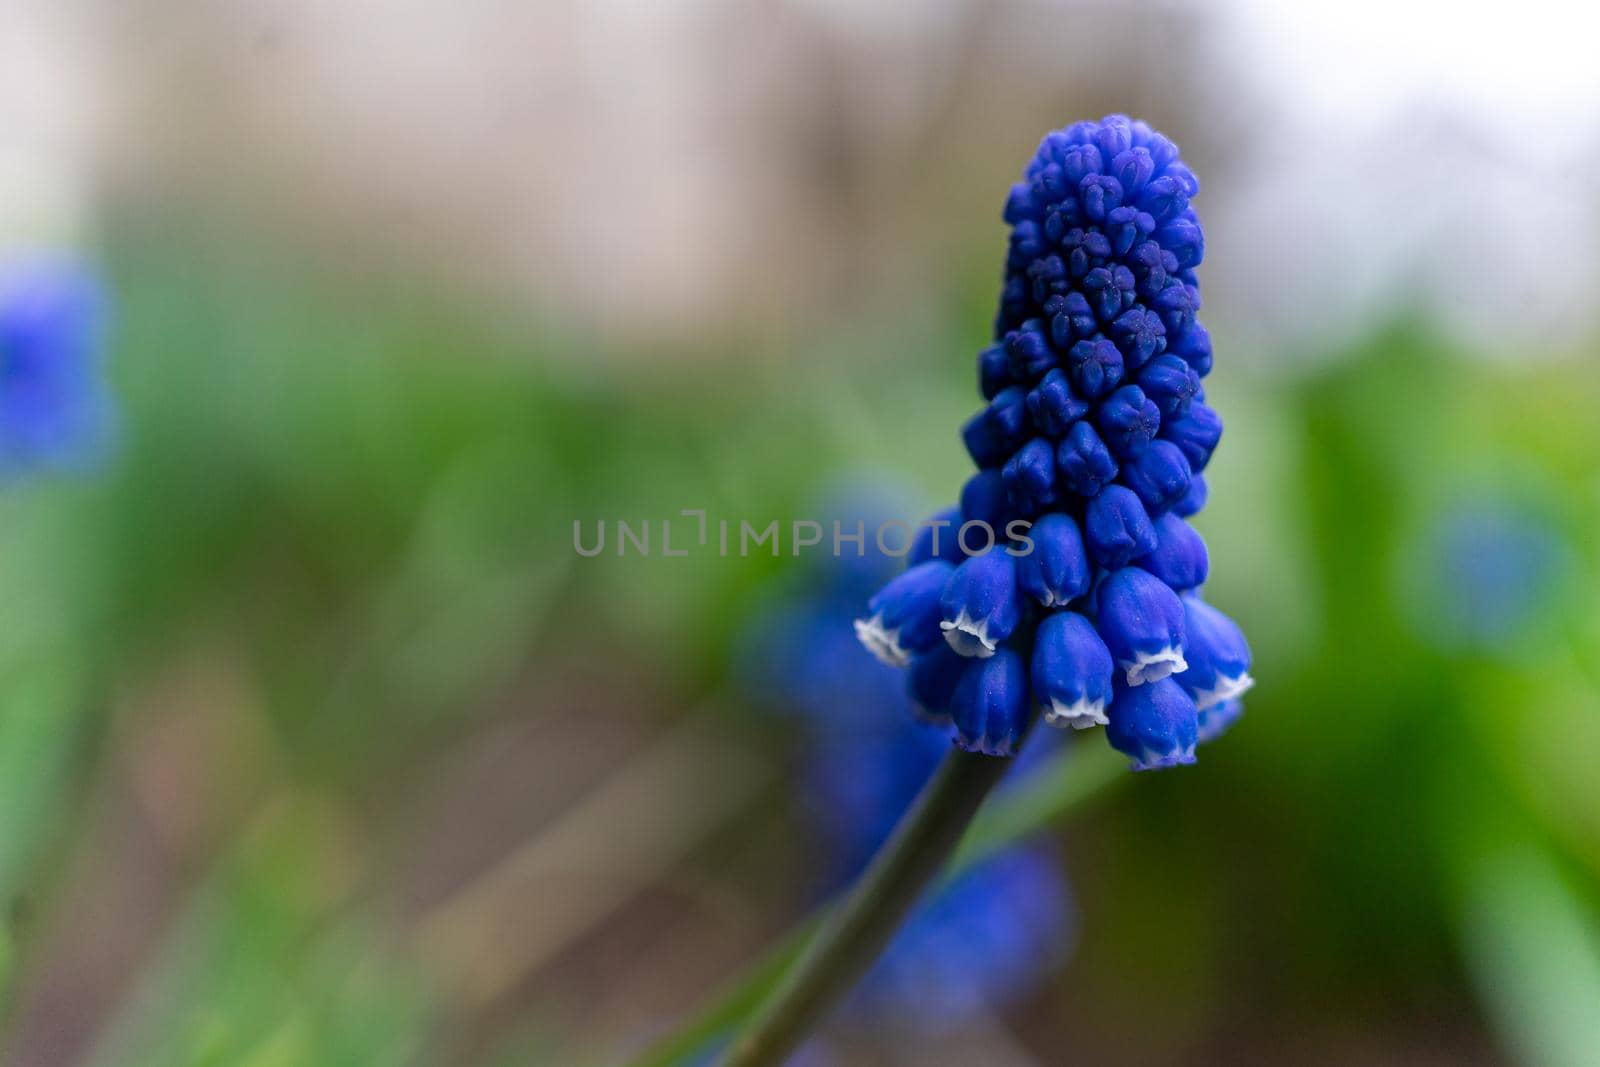 Grape hyacinth photographed close up on a flowerbed. Copy space by Serhii_Voroshchuk